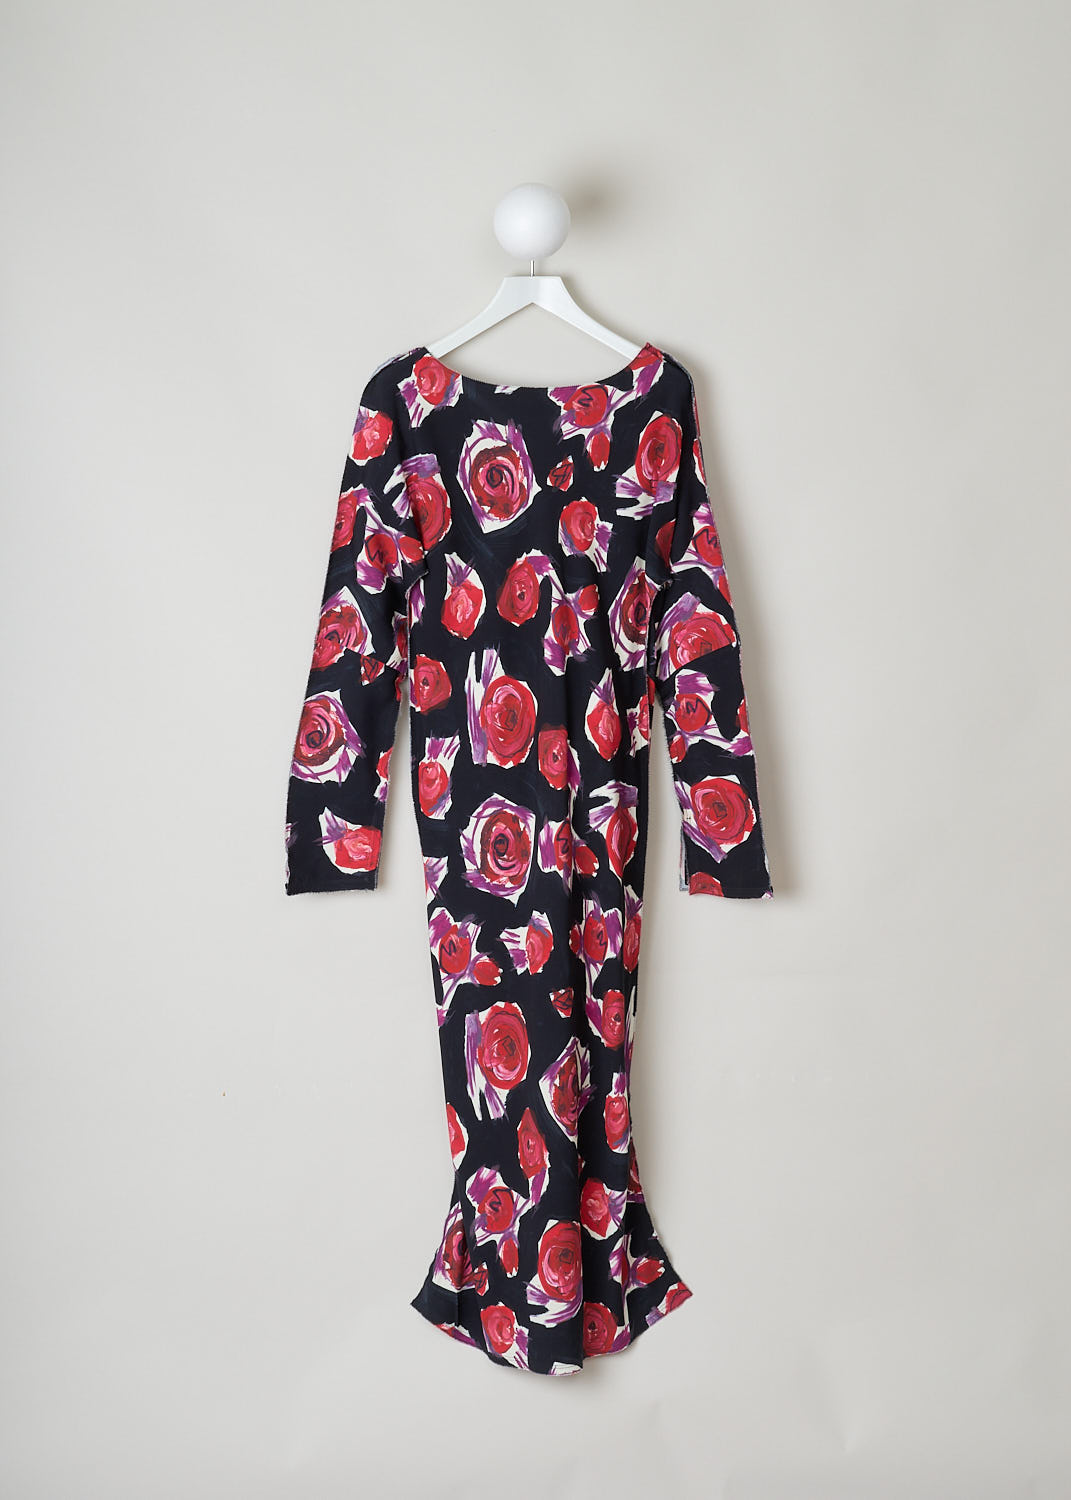 MARNI, ROSE PRINTED MAXI DRESS, ABMA0857A0_UTV908_SRN99, Black, Print, Front, This long sleeve maxi dress has an all-over rose print. The dress features a boat neckline and has a raw hemline throughout. The dress has slits on the sleeves and on the sides of the skirt. In the back, a concealed centre zip functions as closure option.
